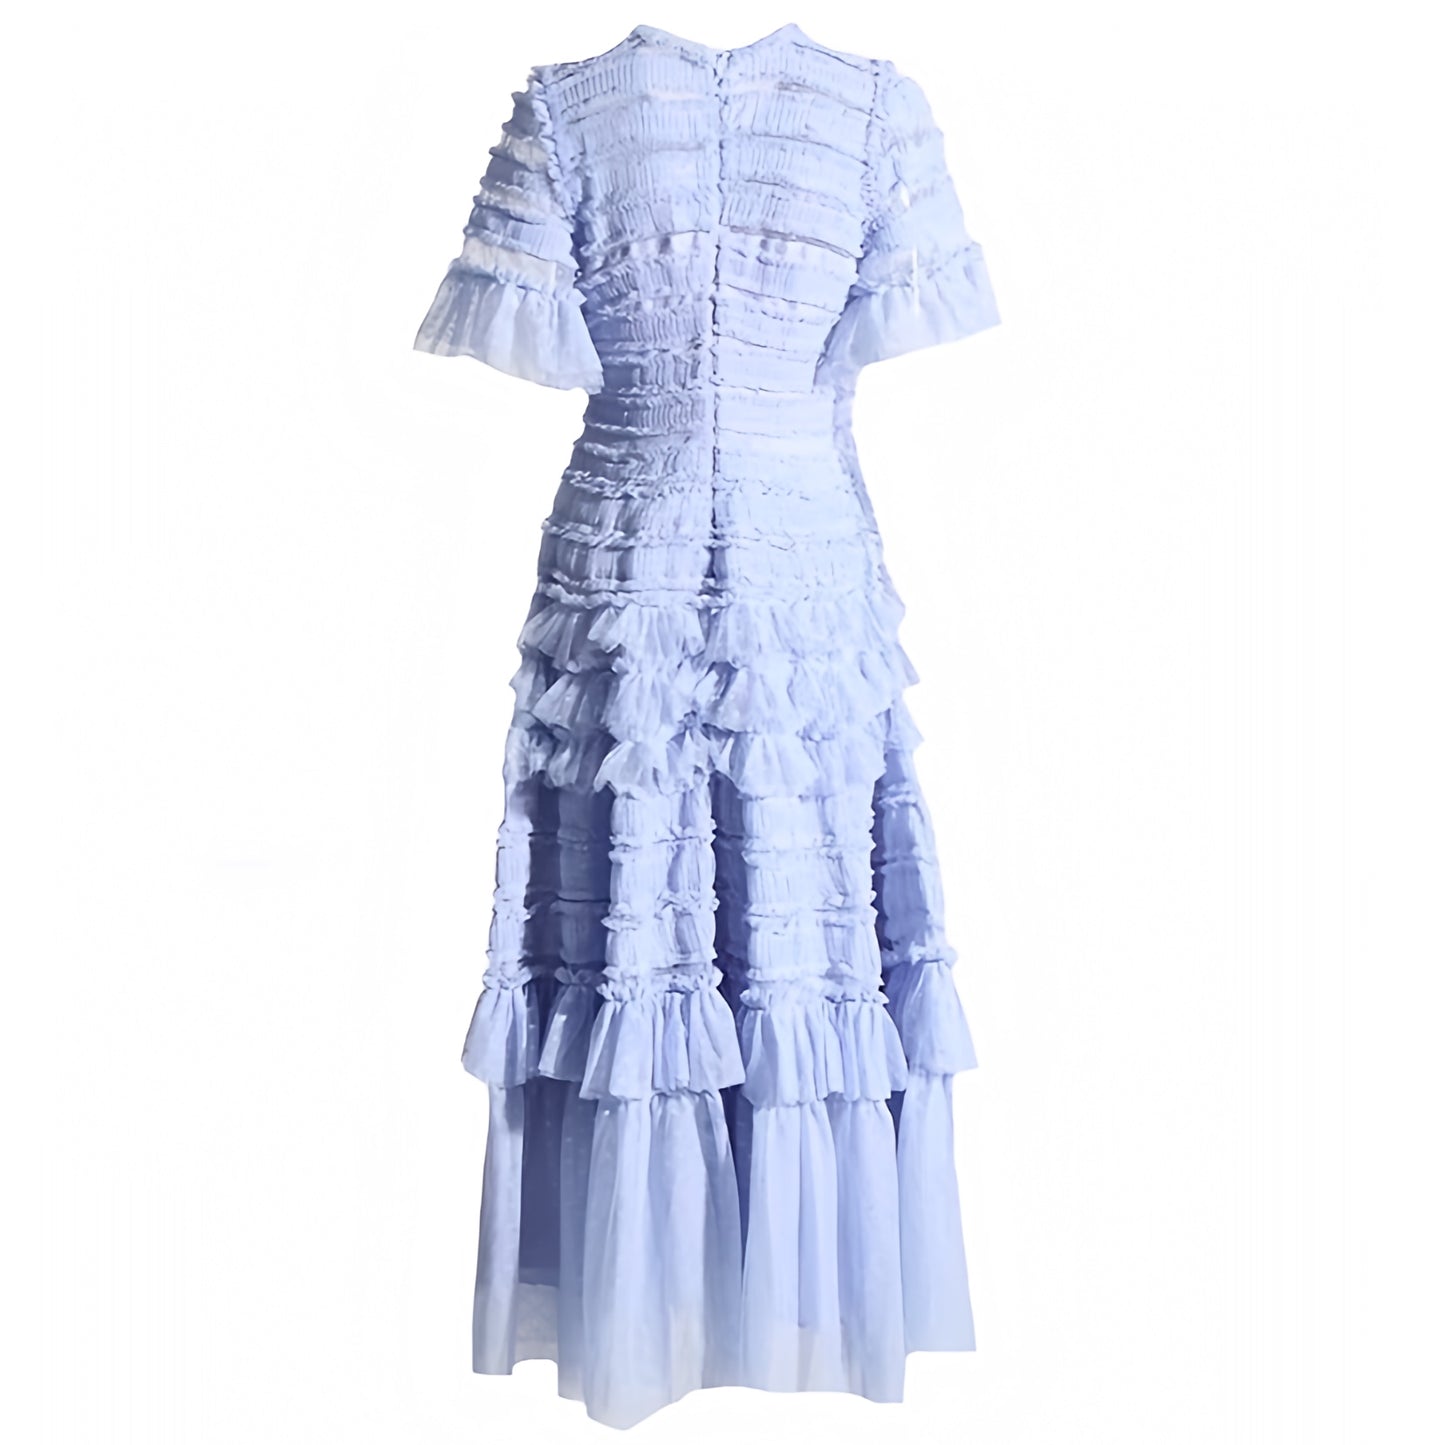 light-blue-layered-ruffle-trim-feathered-mesh-patterned-bodycon-slim-fitted-bodice-drop-waist-round-neck-short-sleeve-flowy-tiered-fit-and-flare-midi-long-maxi-dress-ball-gown-couture-women-ladies-chic-trendy-spring-2024-summer-semi-formal-elegant-classy-casual-feminine-gala-prom-debutante-wedding-guest-party-preppy-style-beach-vacation-sundress-zimmerman-revolve-loveshackfancy-dupe